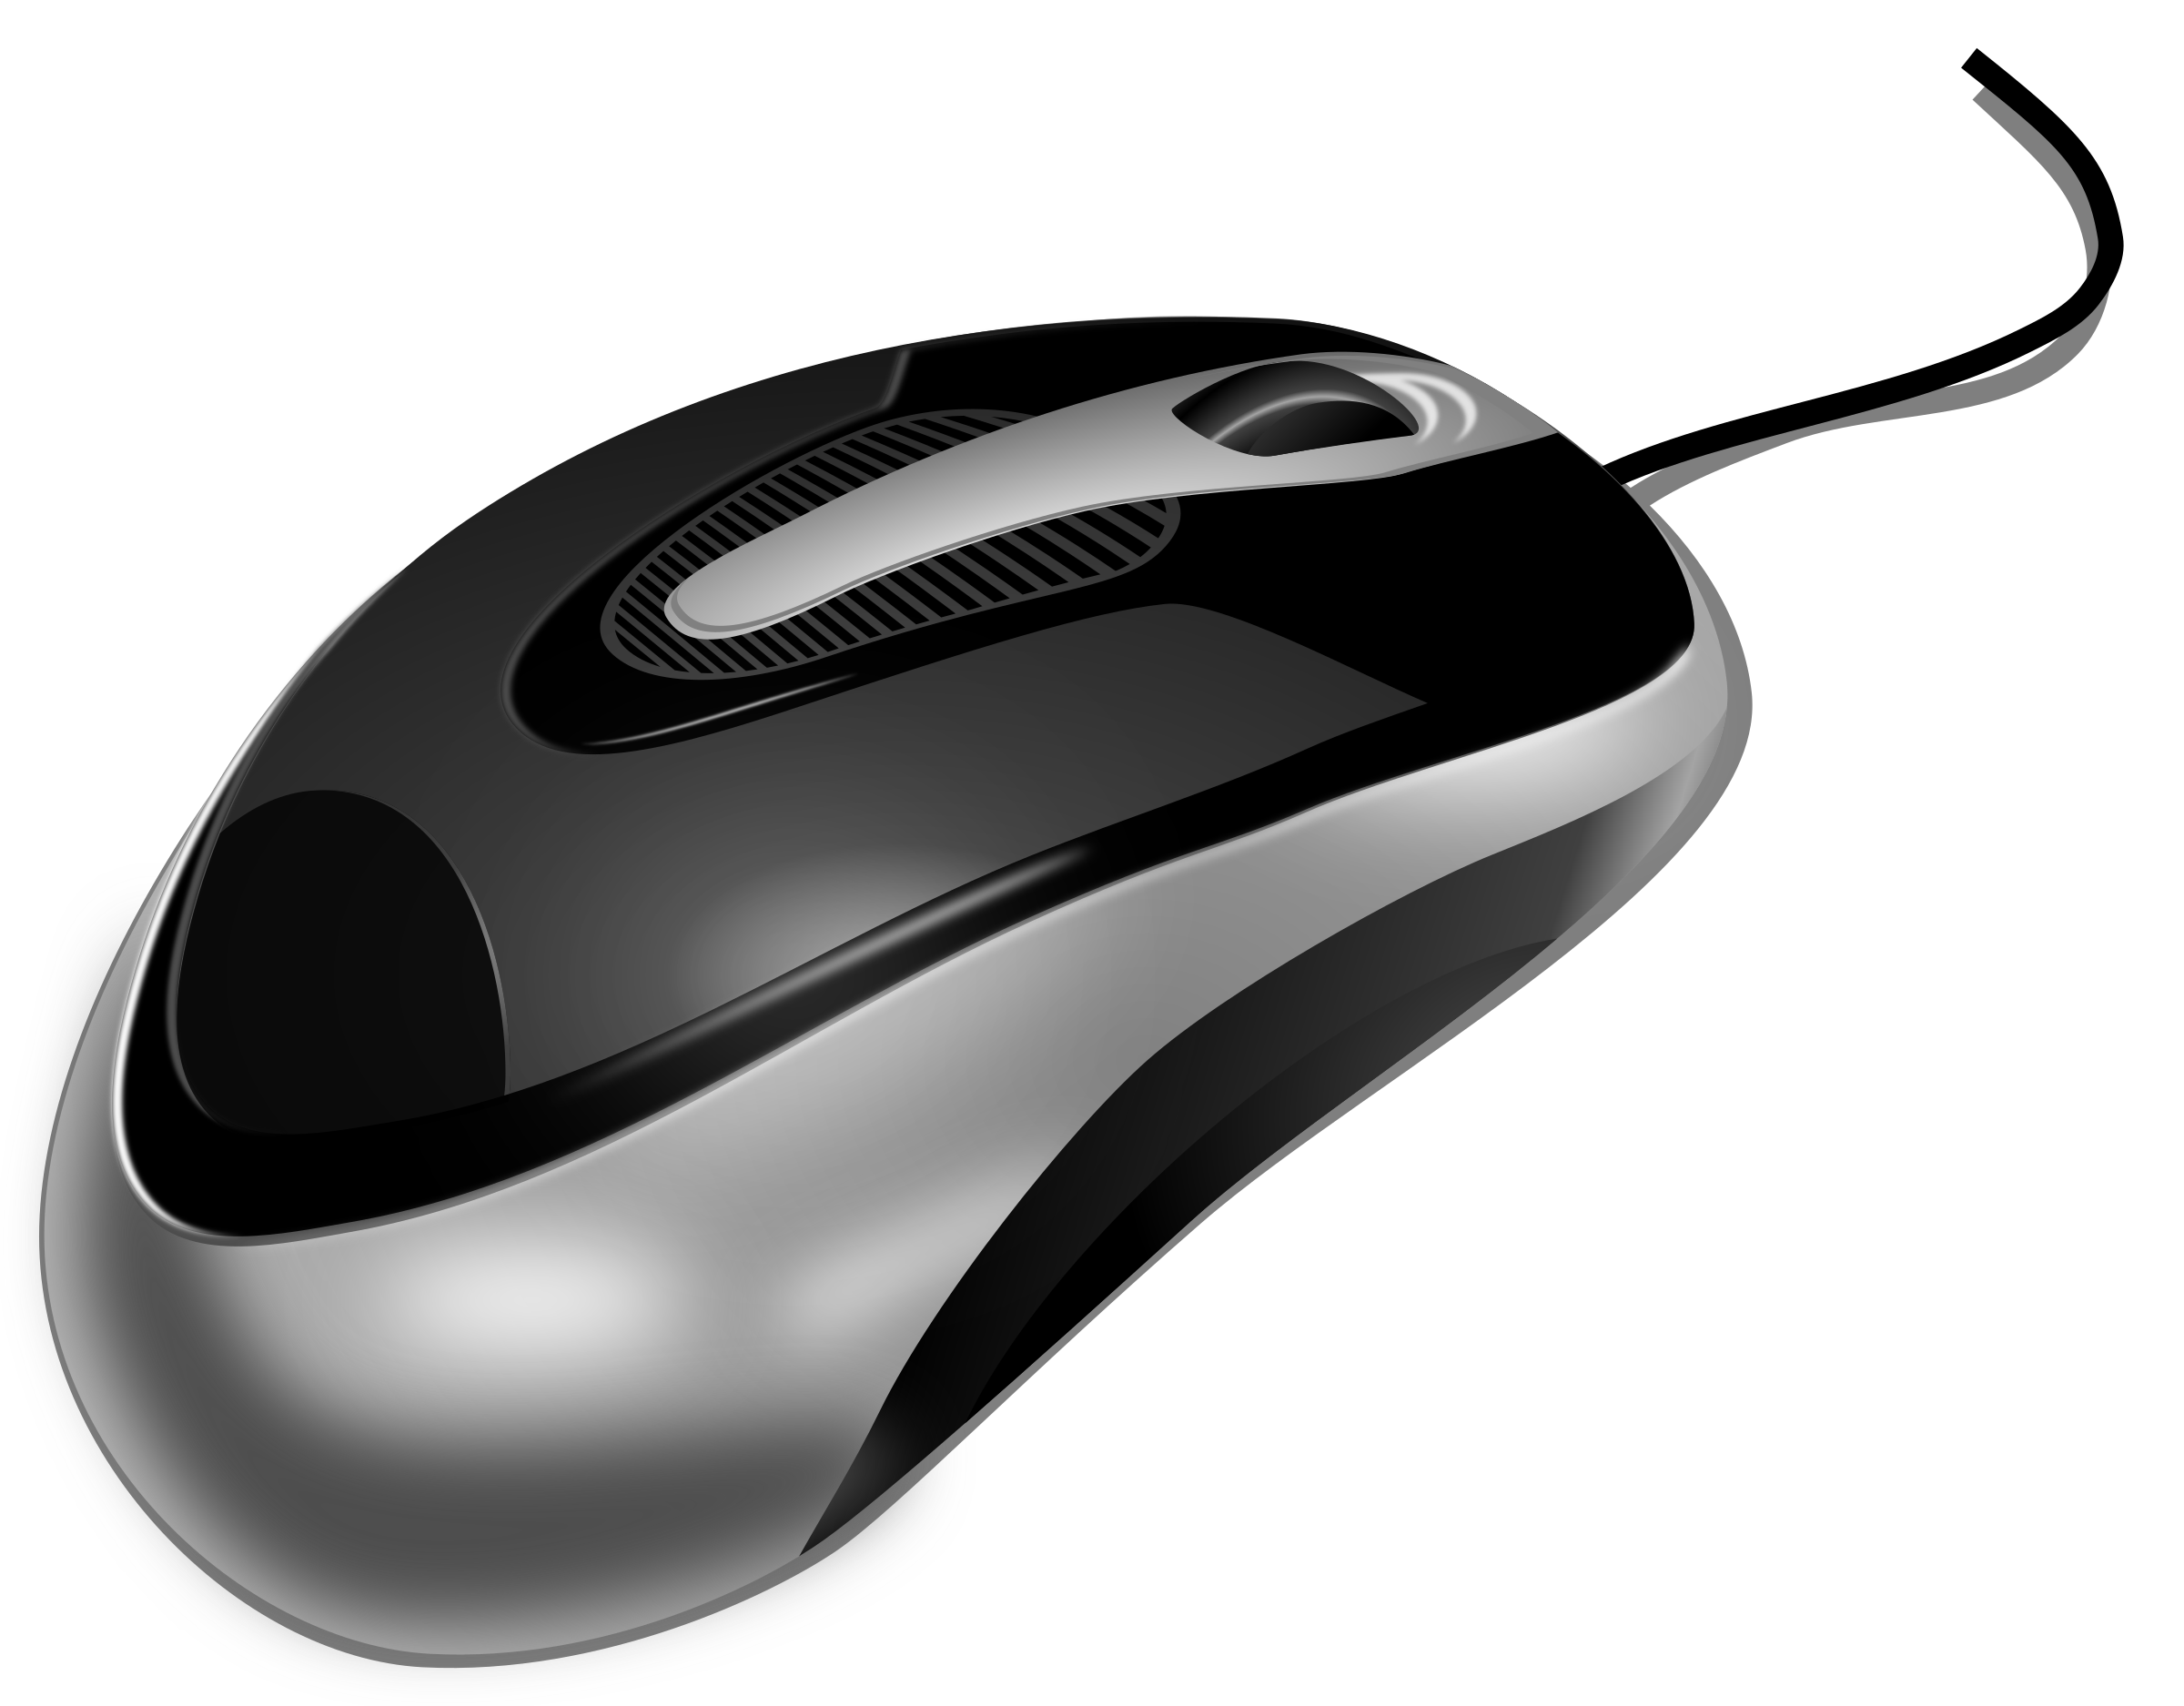 Input device big image. White clipart computer mouse